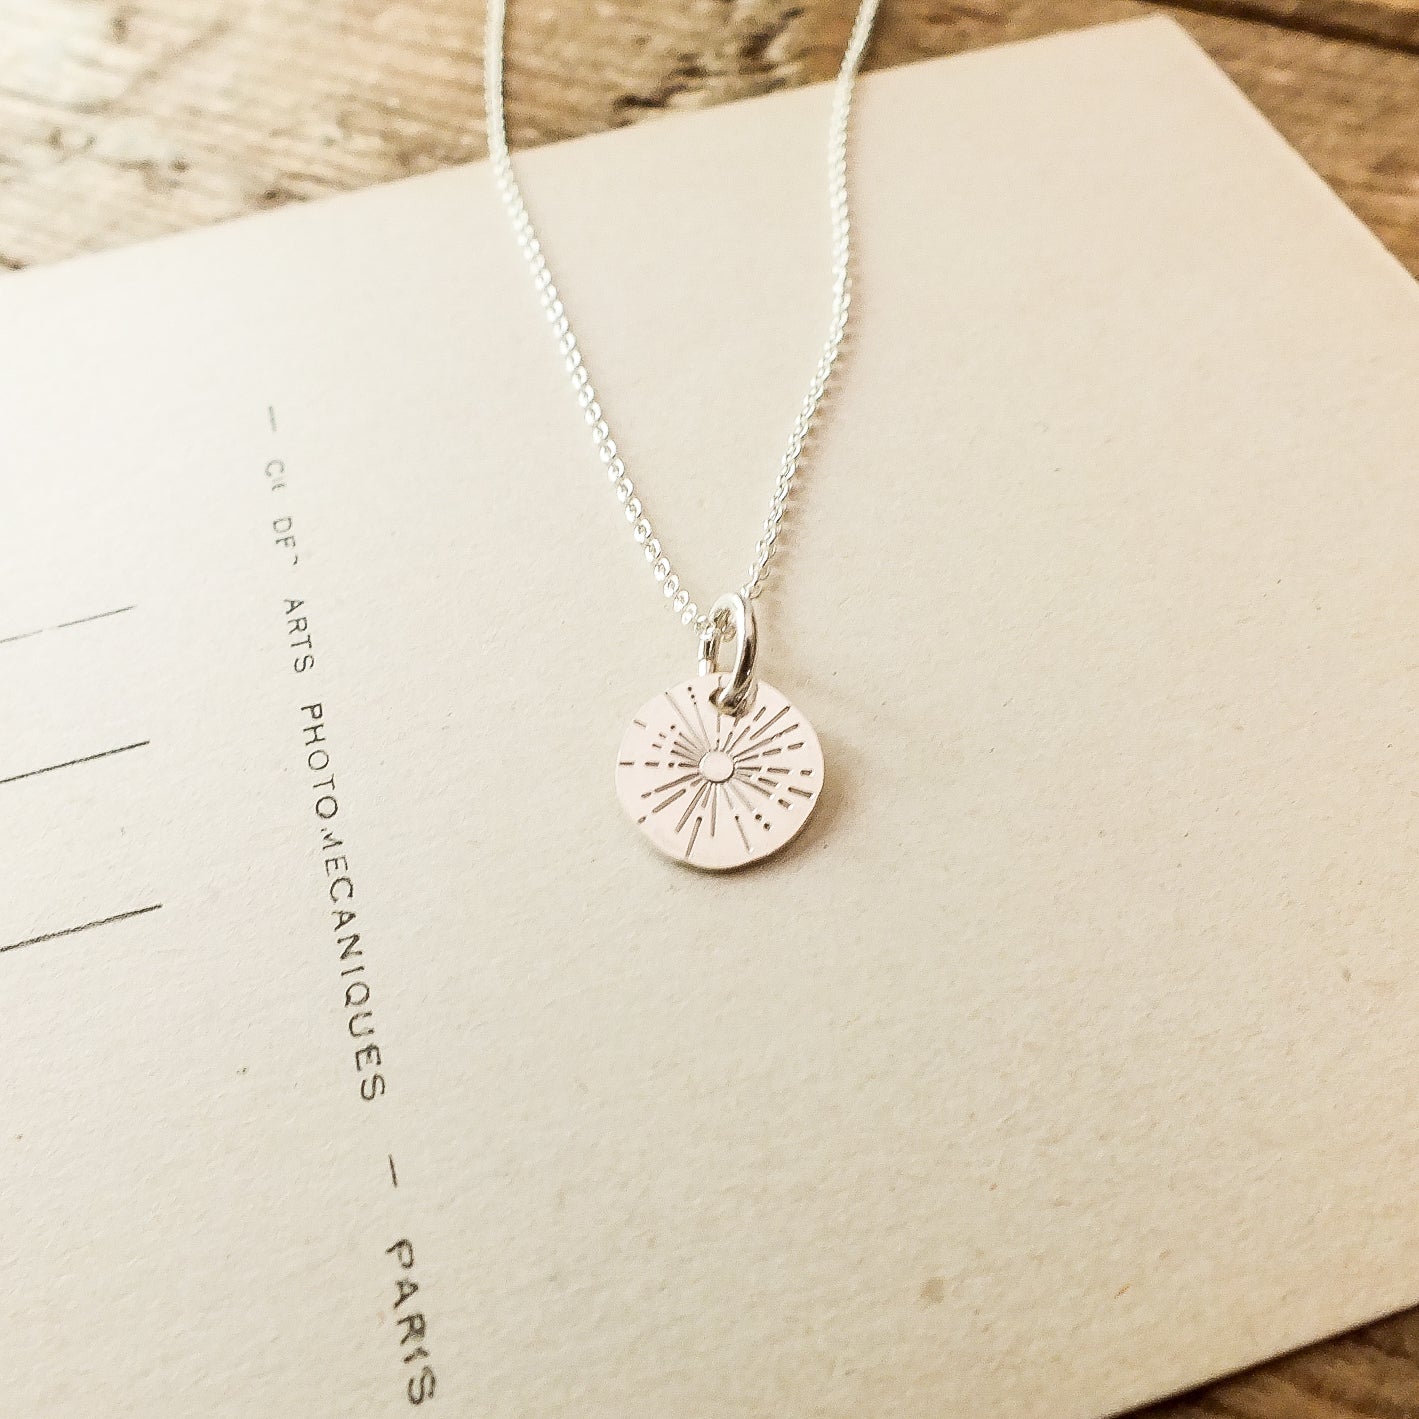 Becoming Jewelry&#39;s Be The Light Necklace with Sunshine Charm design on a wooden surface.